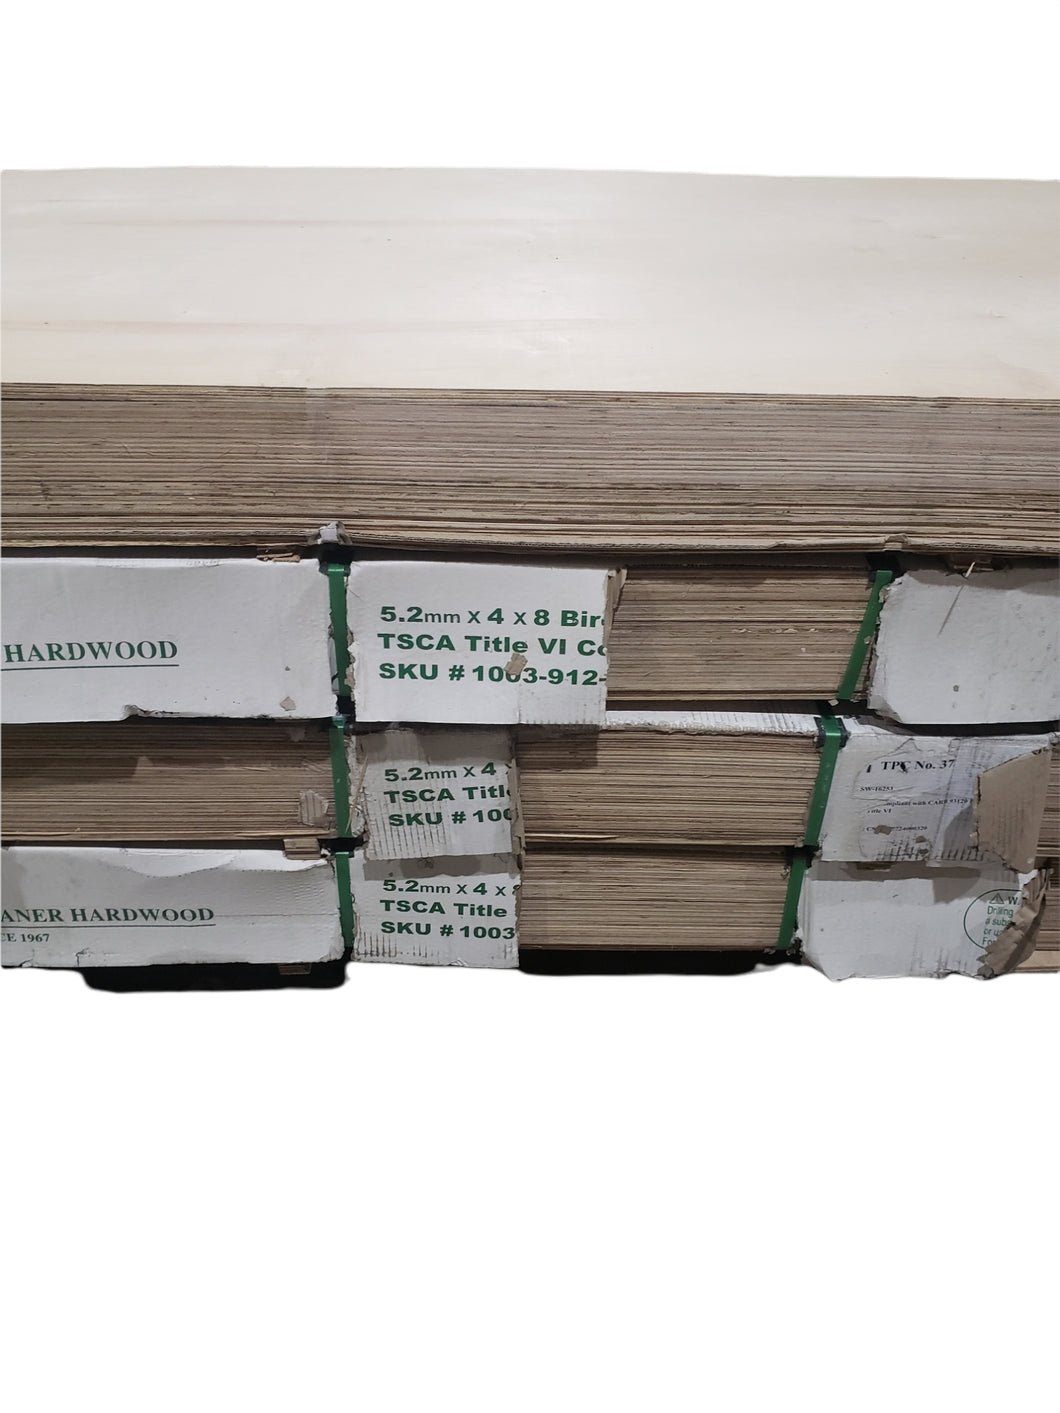 Prime Plywood 5.2mm 4'X8' R/C Birch - IN STORE PICKUP ONLY - FreemanLiquidators - [product_description]